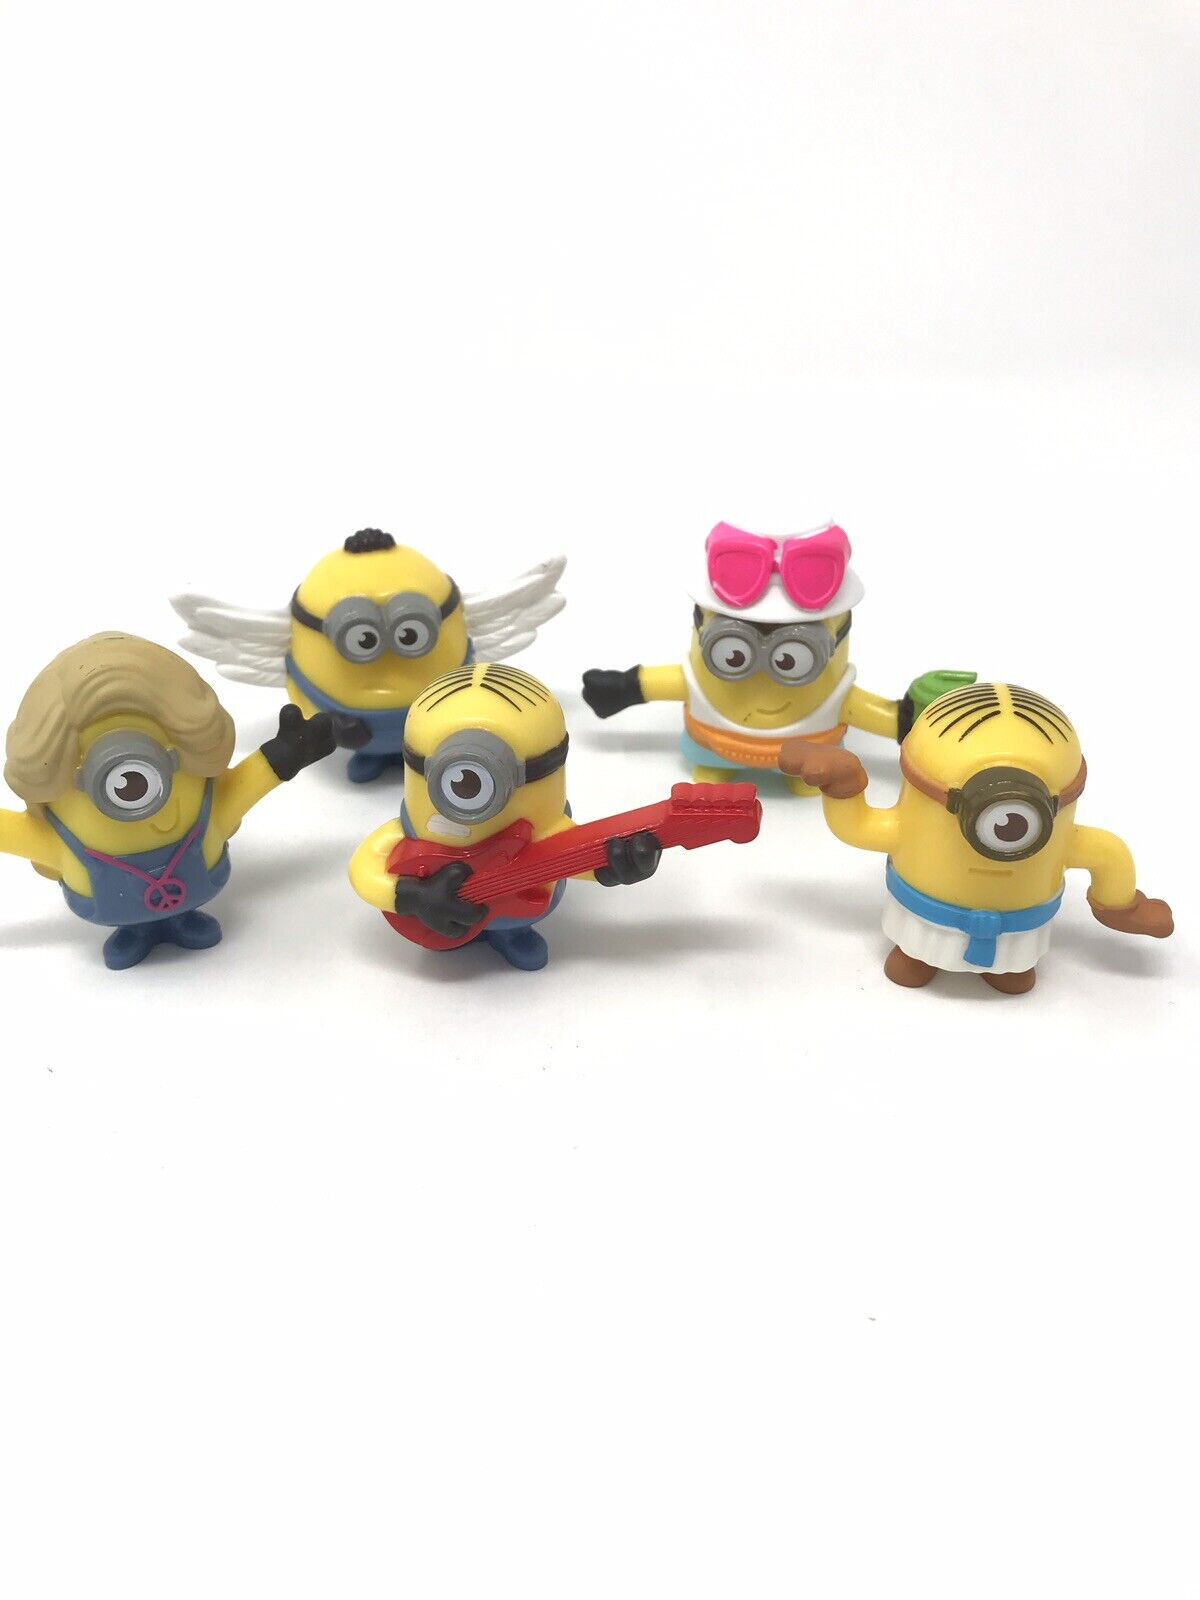 Minions Rise Of Gru Mcdonalds Happy Meal Toys Despicable Me 19 Ebay